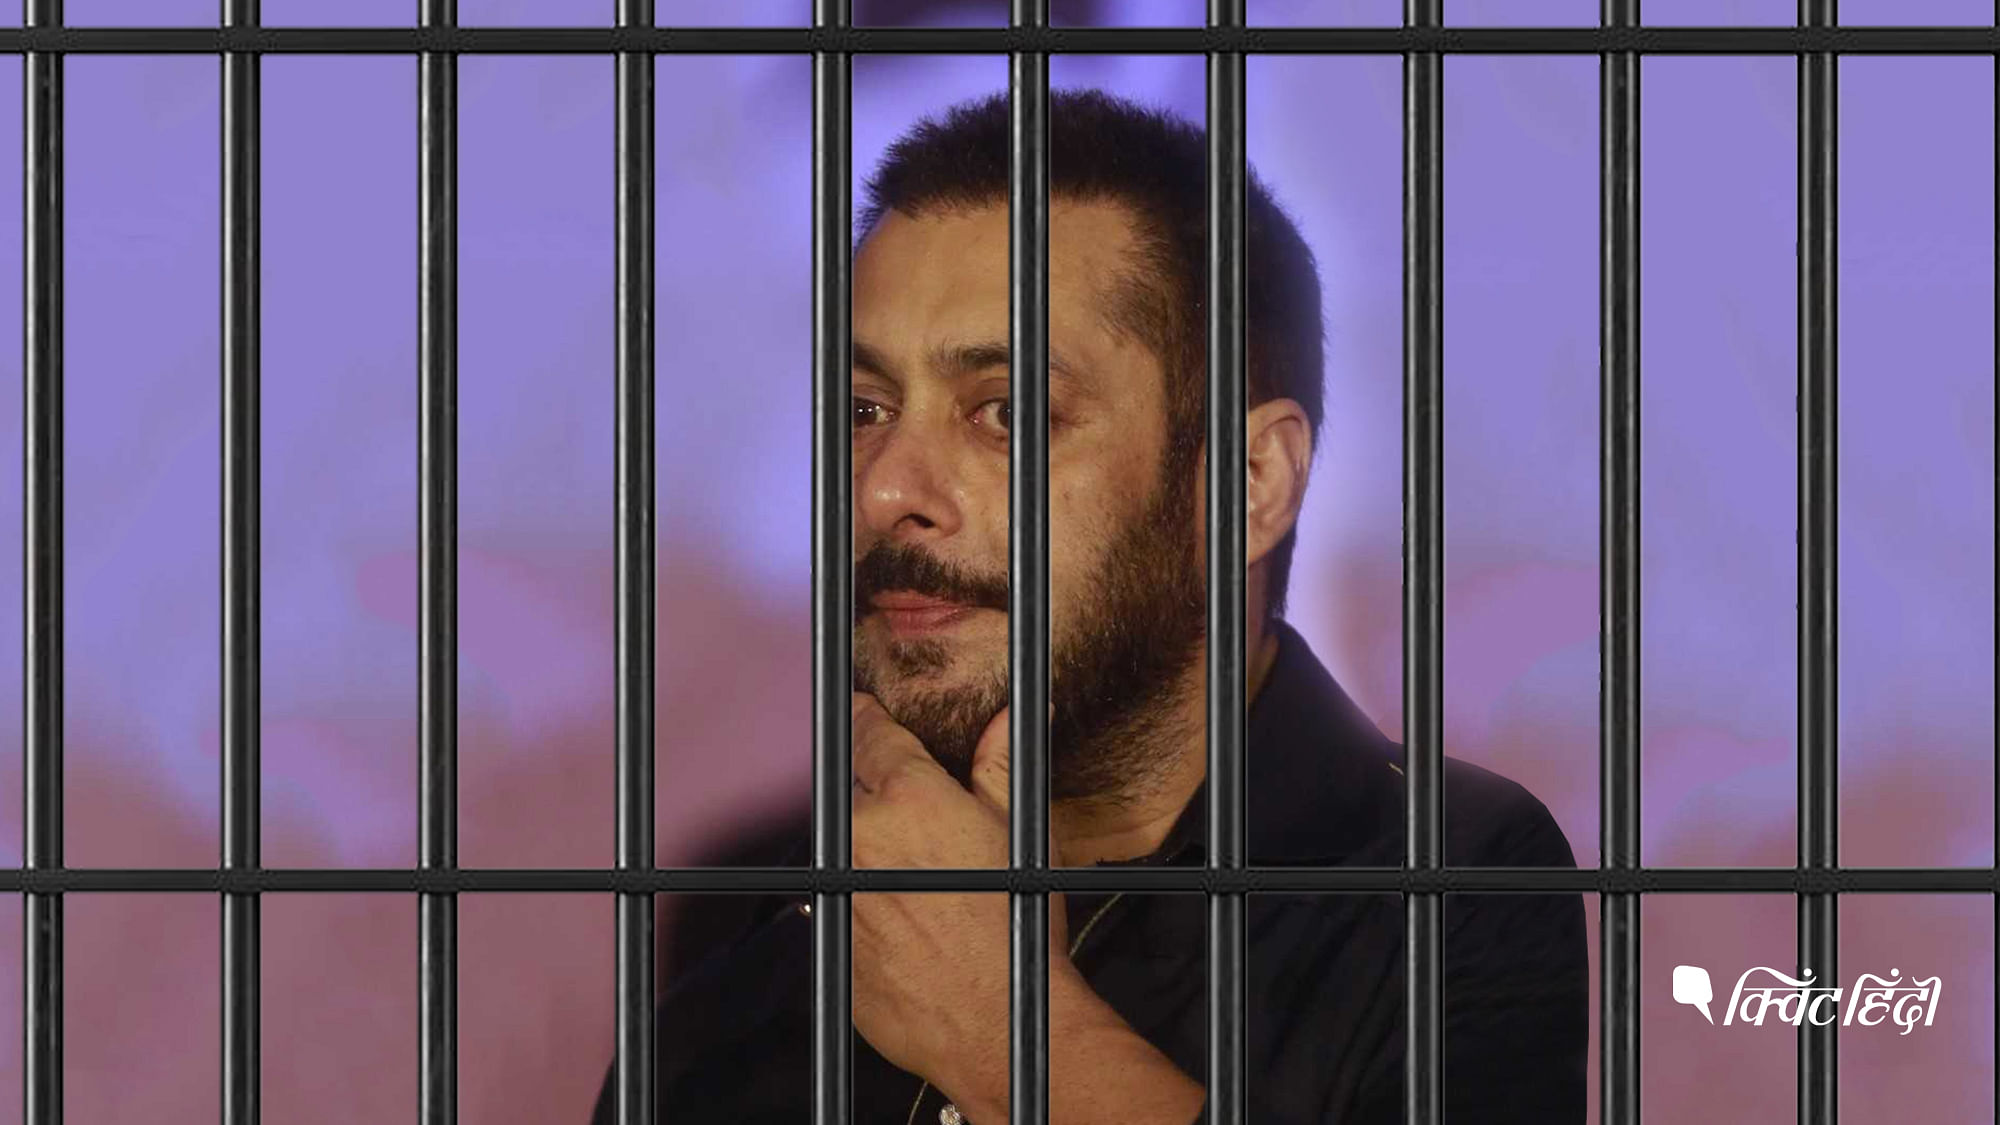 Bollywood’s Bhai, Salman Khan was sentenced to five years of imprisonment in the 1998 blackbuck poaching case by a trial court in Jodhpur, Rajasthan.